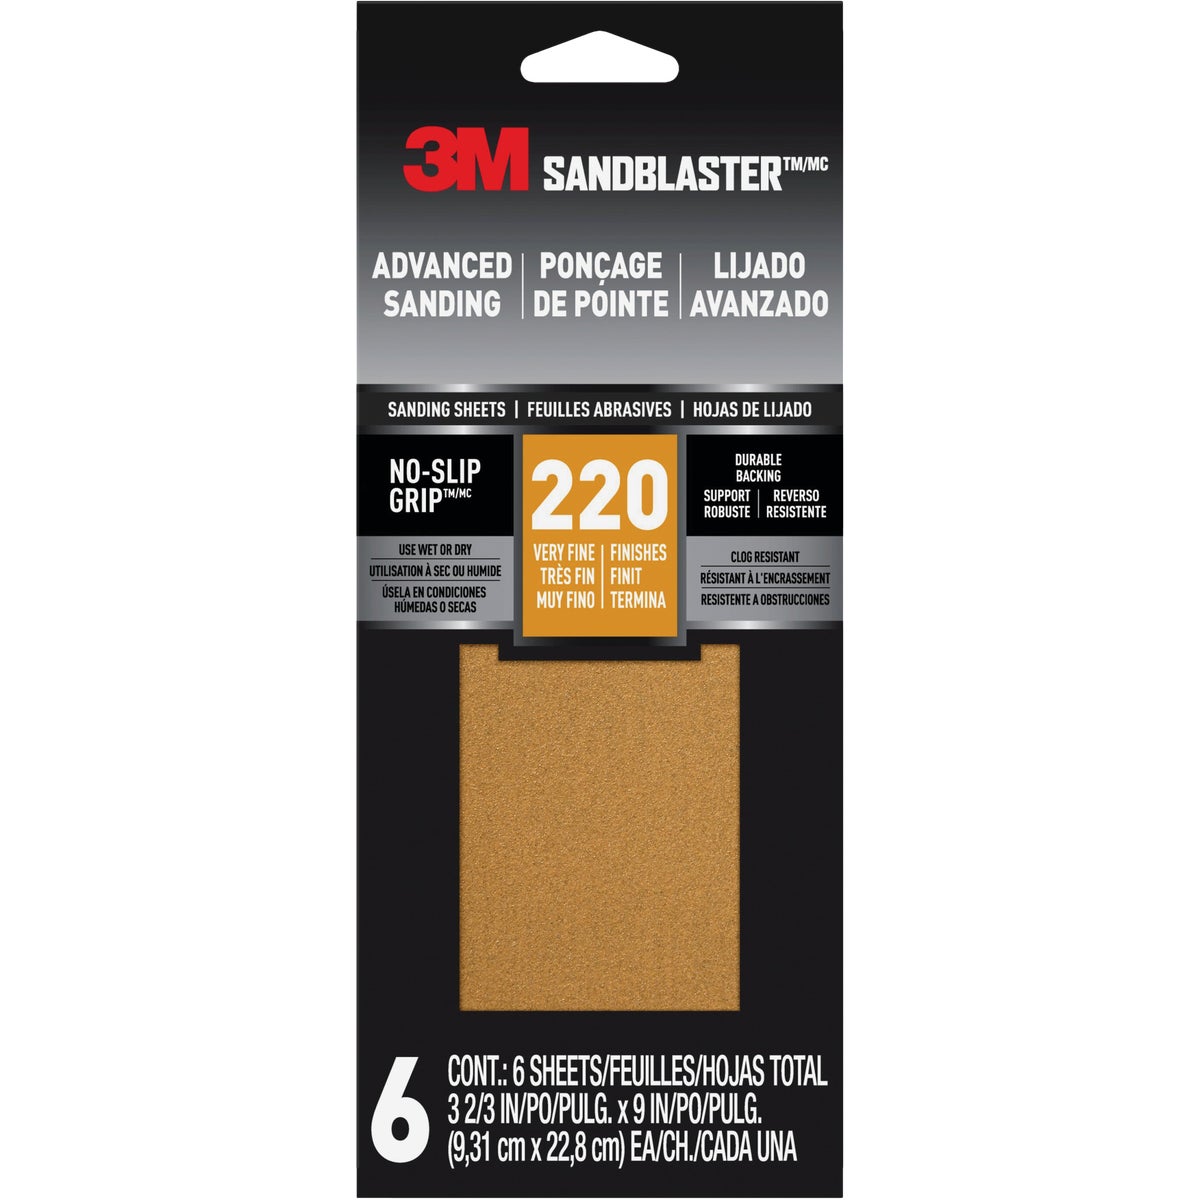 Item 308544, Get the job done in a flash with the help of 3M SandBlaster No Slip Grip 